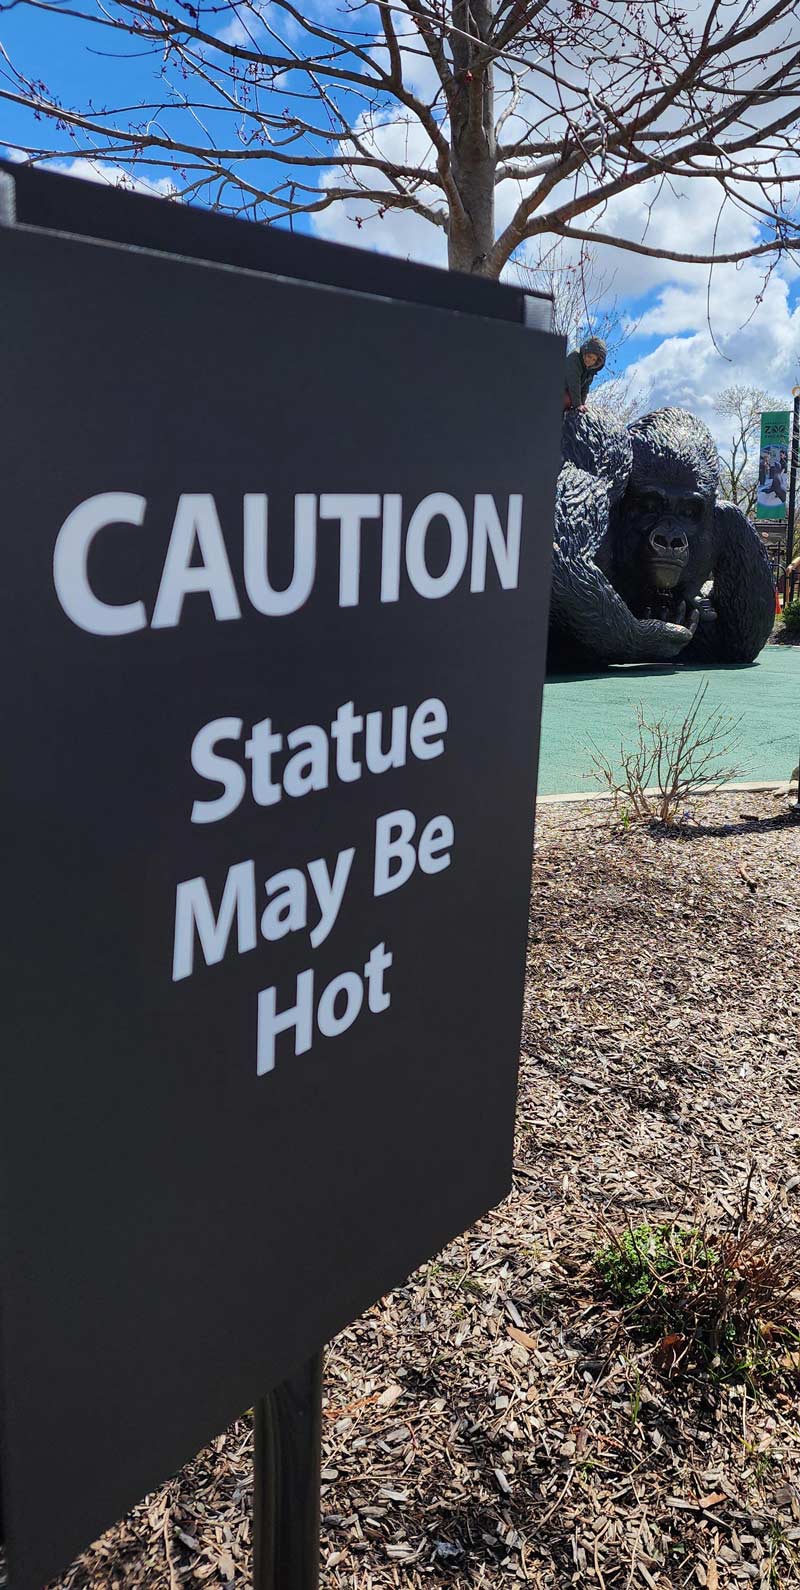 Correction: Statue IS hot